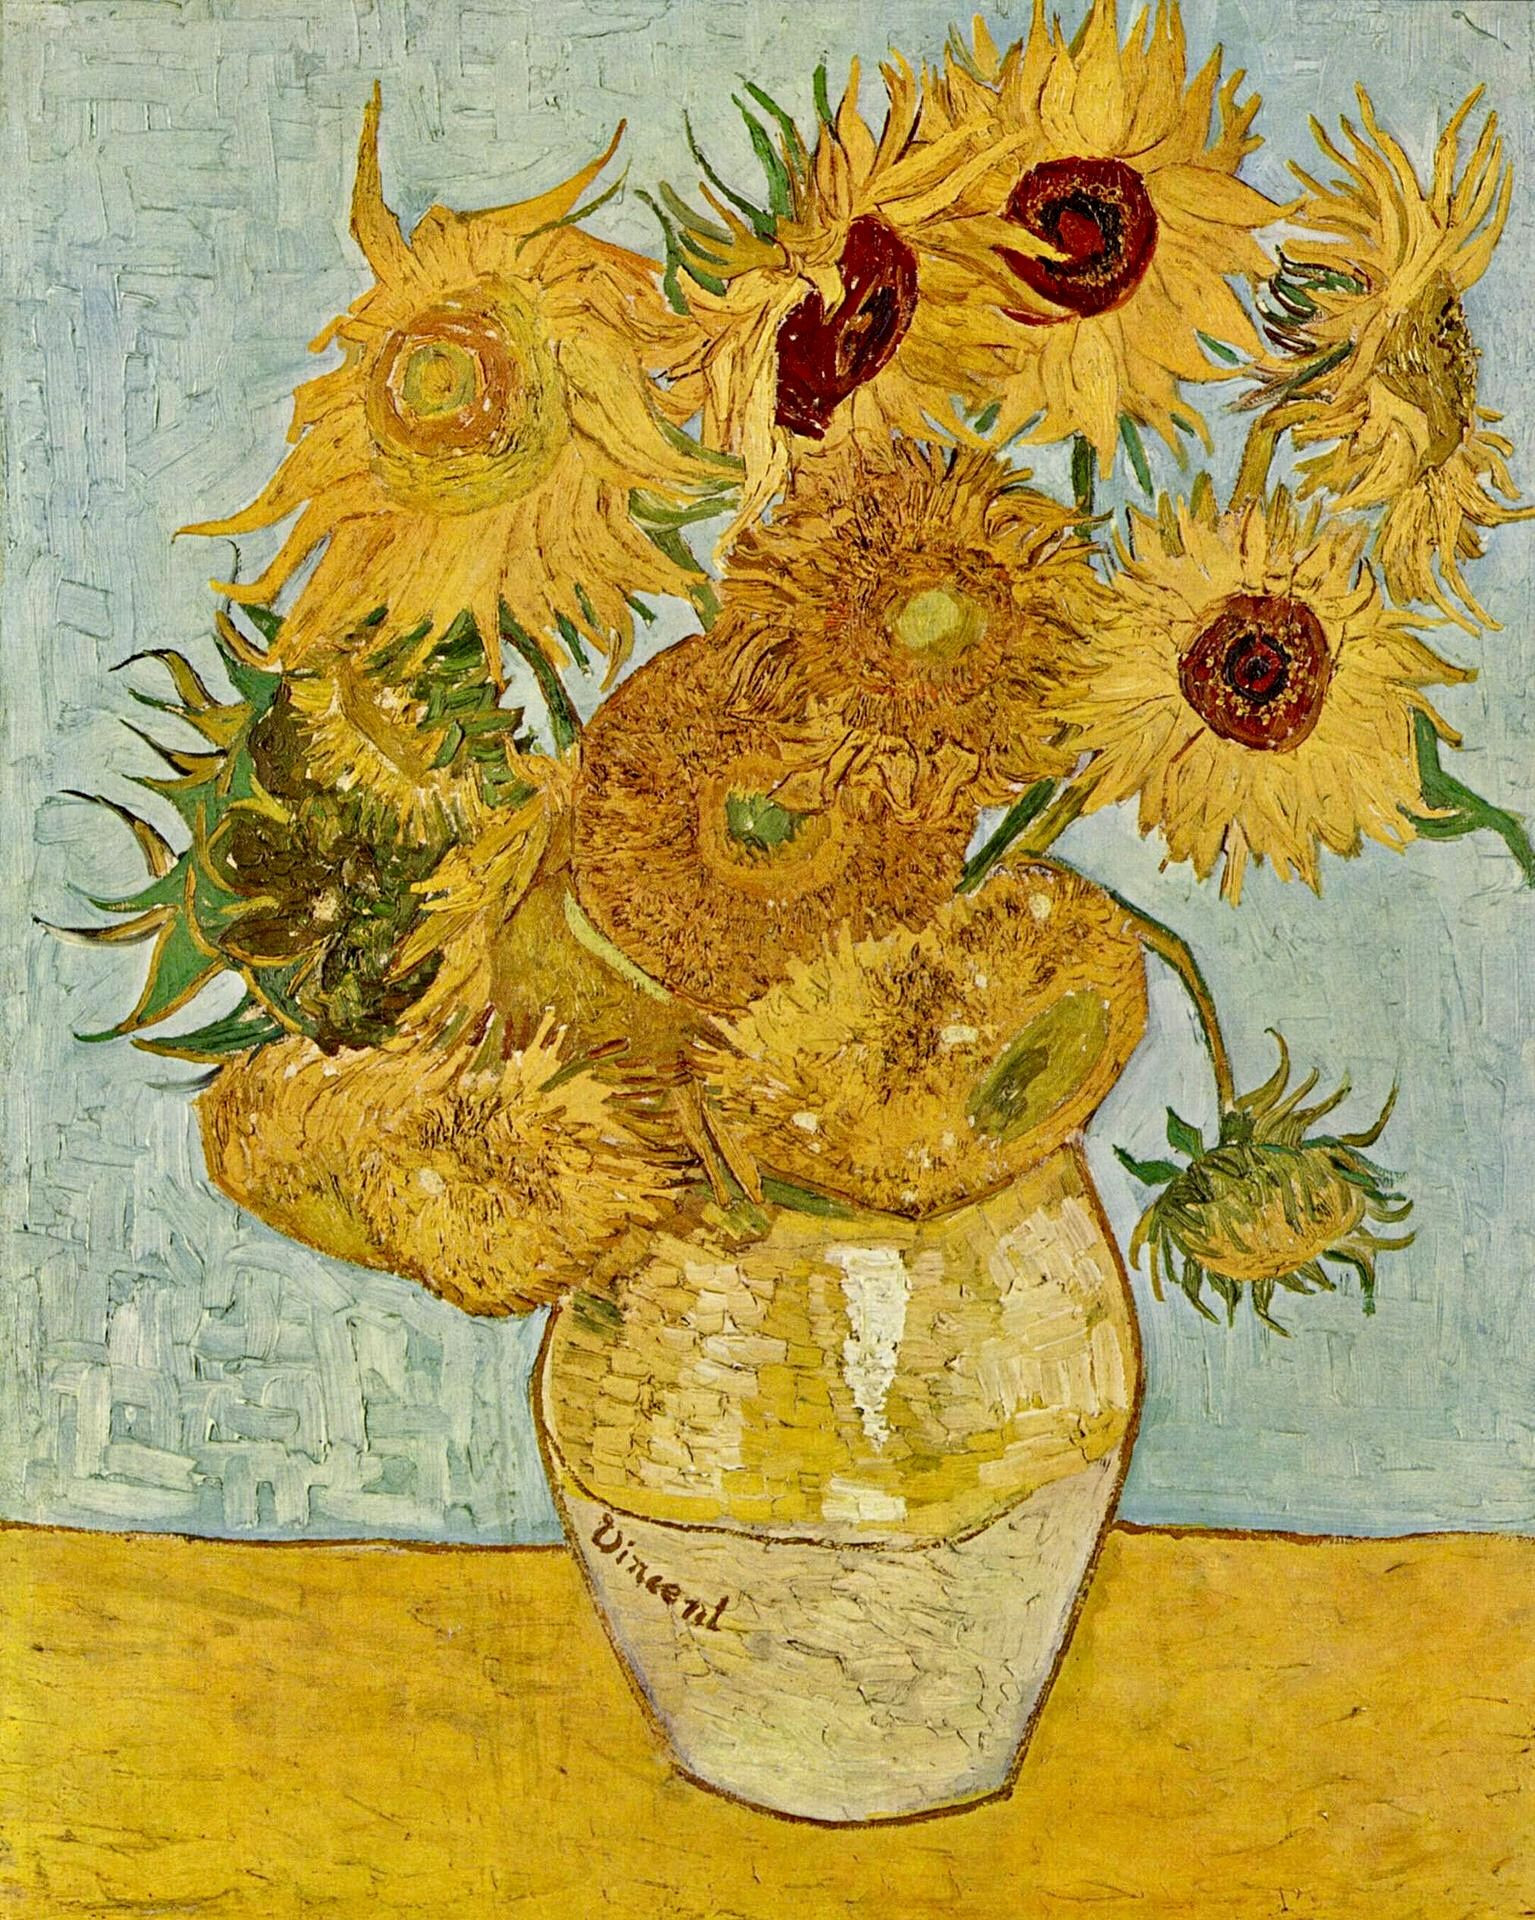 11 Recommended Sunflowers Blue Vase 2024 free download sunflowers blue vase of still life vase with twelve sunflowers he worked his sunflower regarding still life vase with twelve sunflowers he worked his sunflower series in anticipation of paul